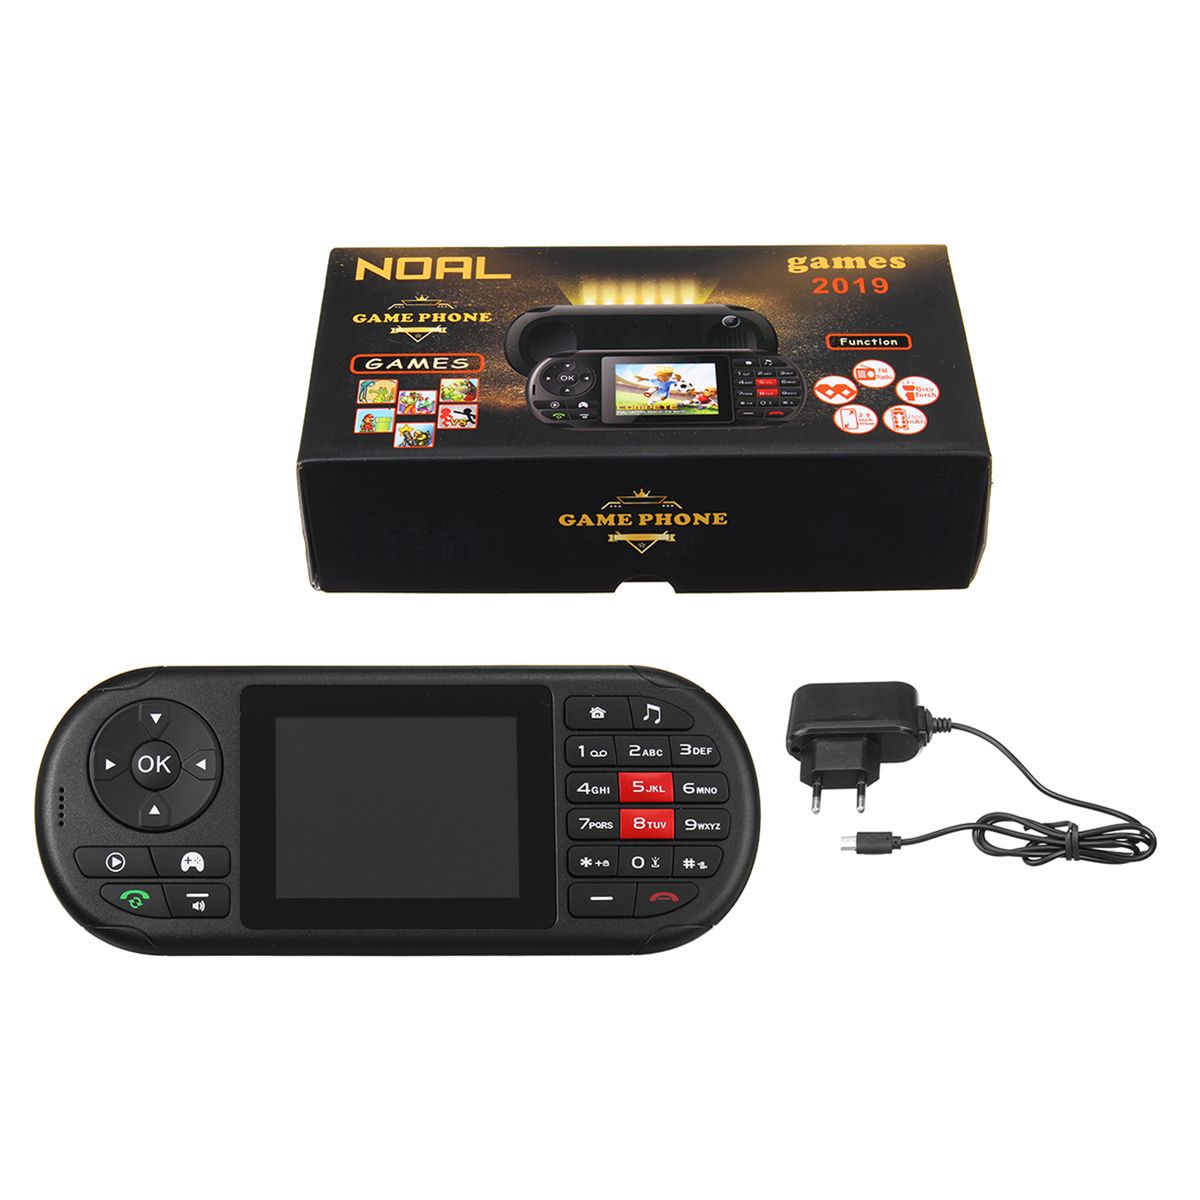 84-Games-In-1-Handheld-Game-Console-Dual-Cards-Standby-Game-Phone-LCD-MP3-FM-Radio-Video-Playback-Ce-1627129